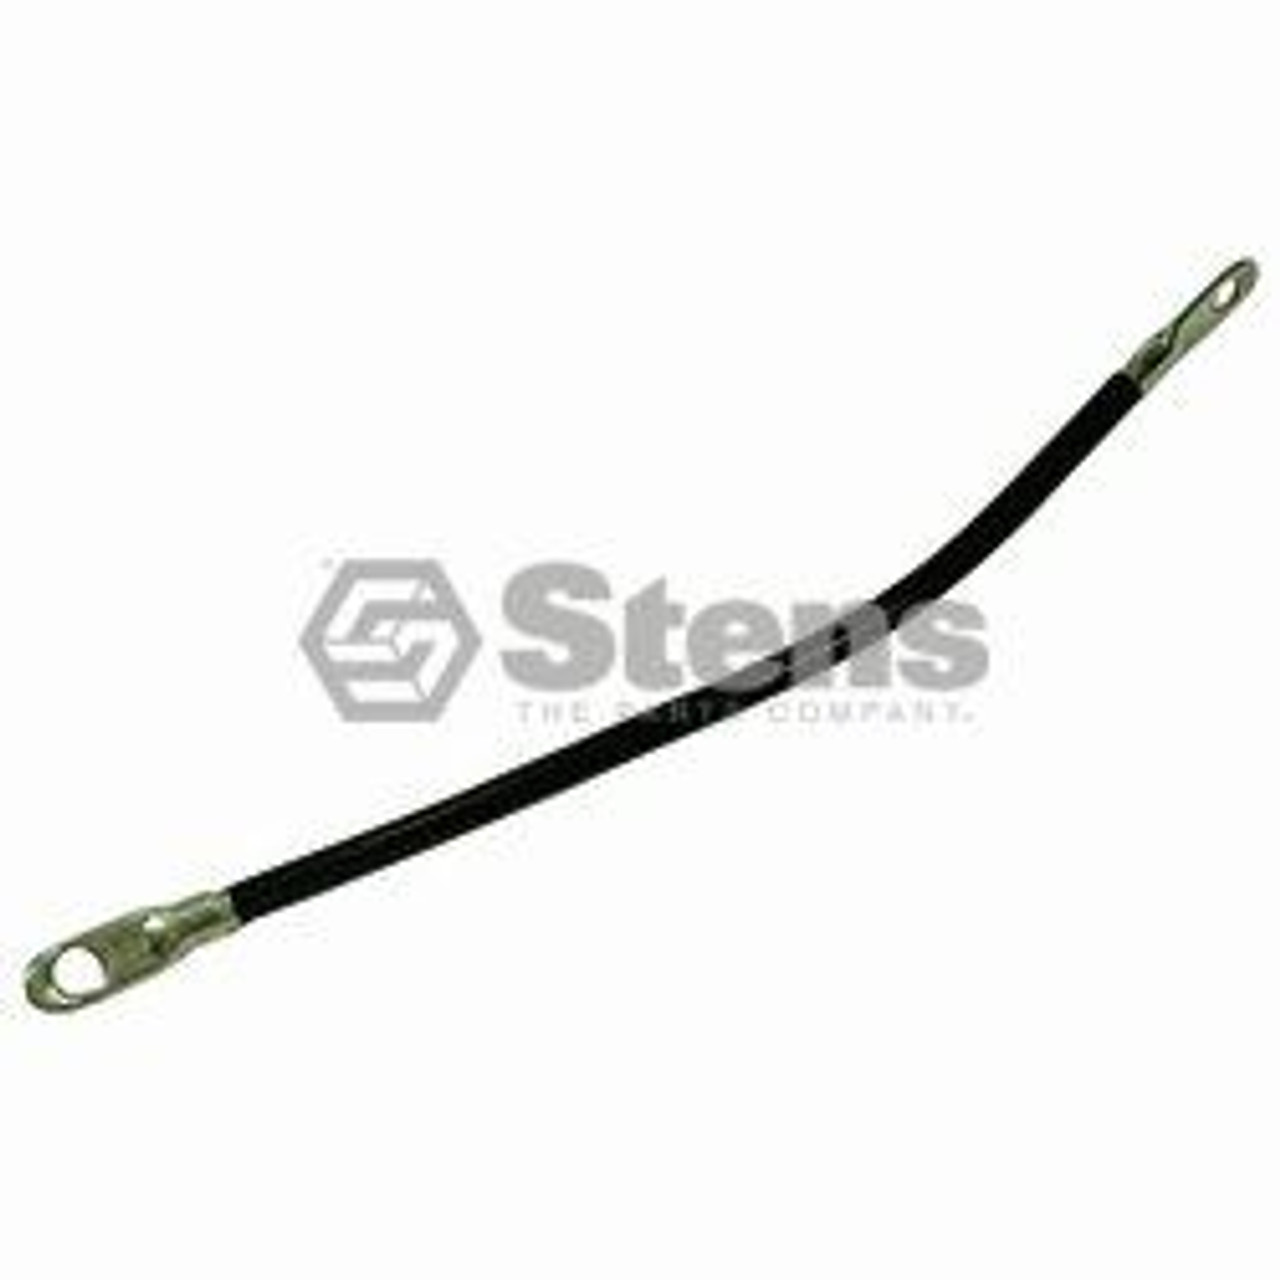 Battery Cable Assembly 425-058STE